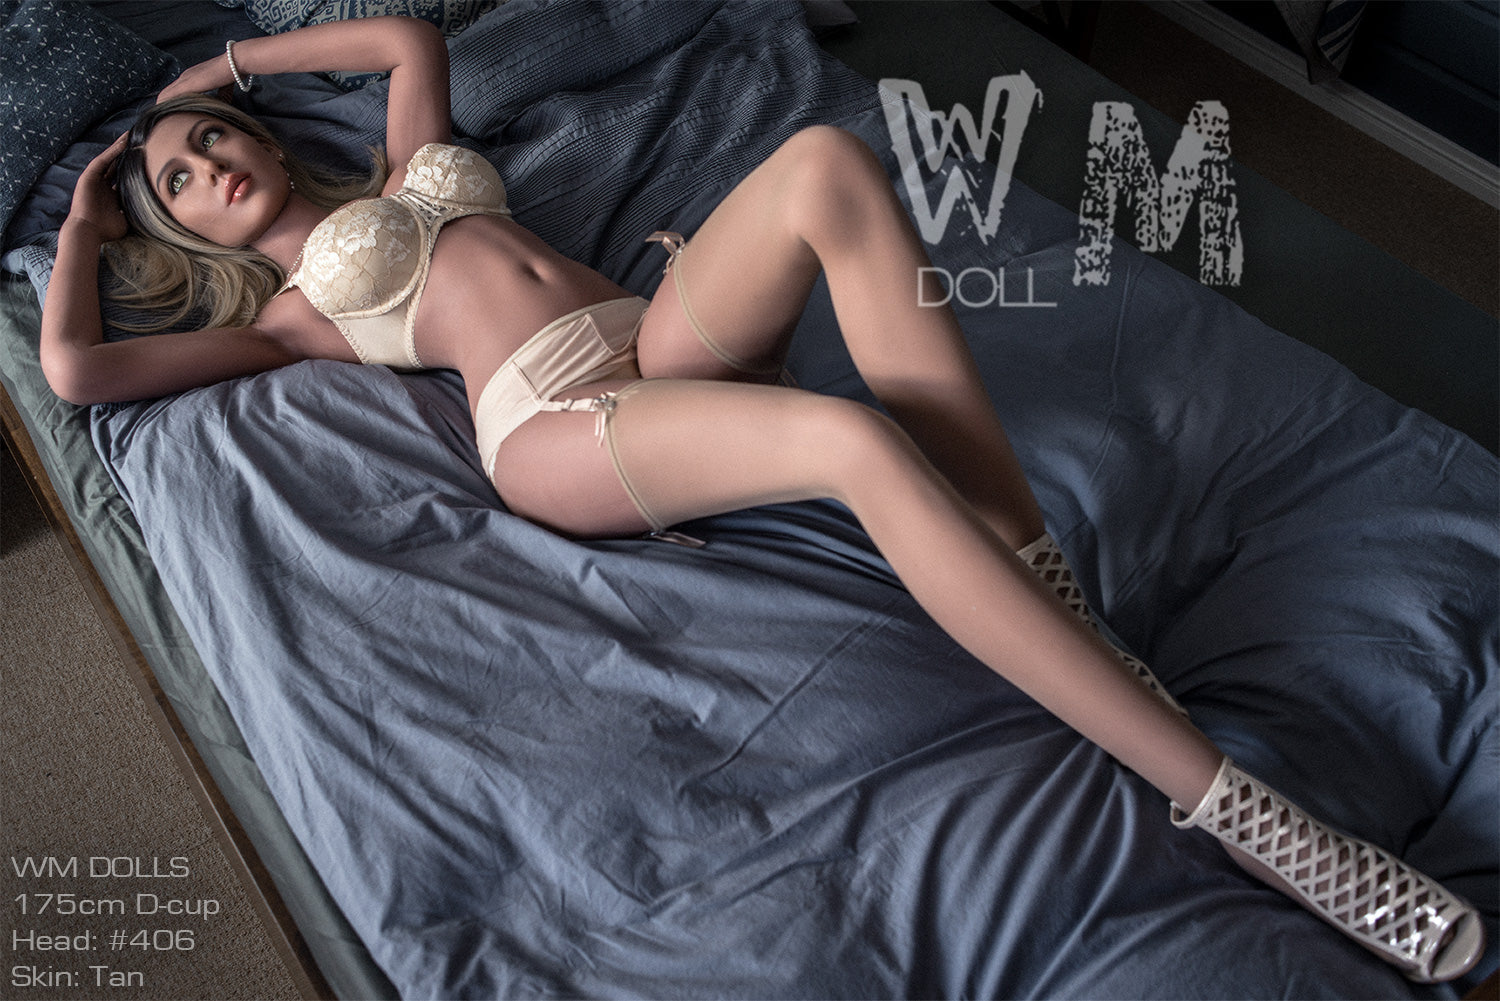 WM DOLL 175 CM D SILICONE - Sarah | Buy Sex Dolls at DOLLS ACTUALLY